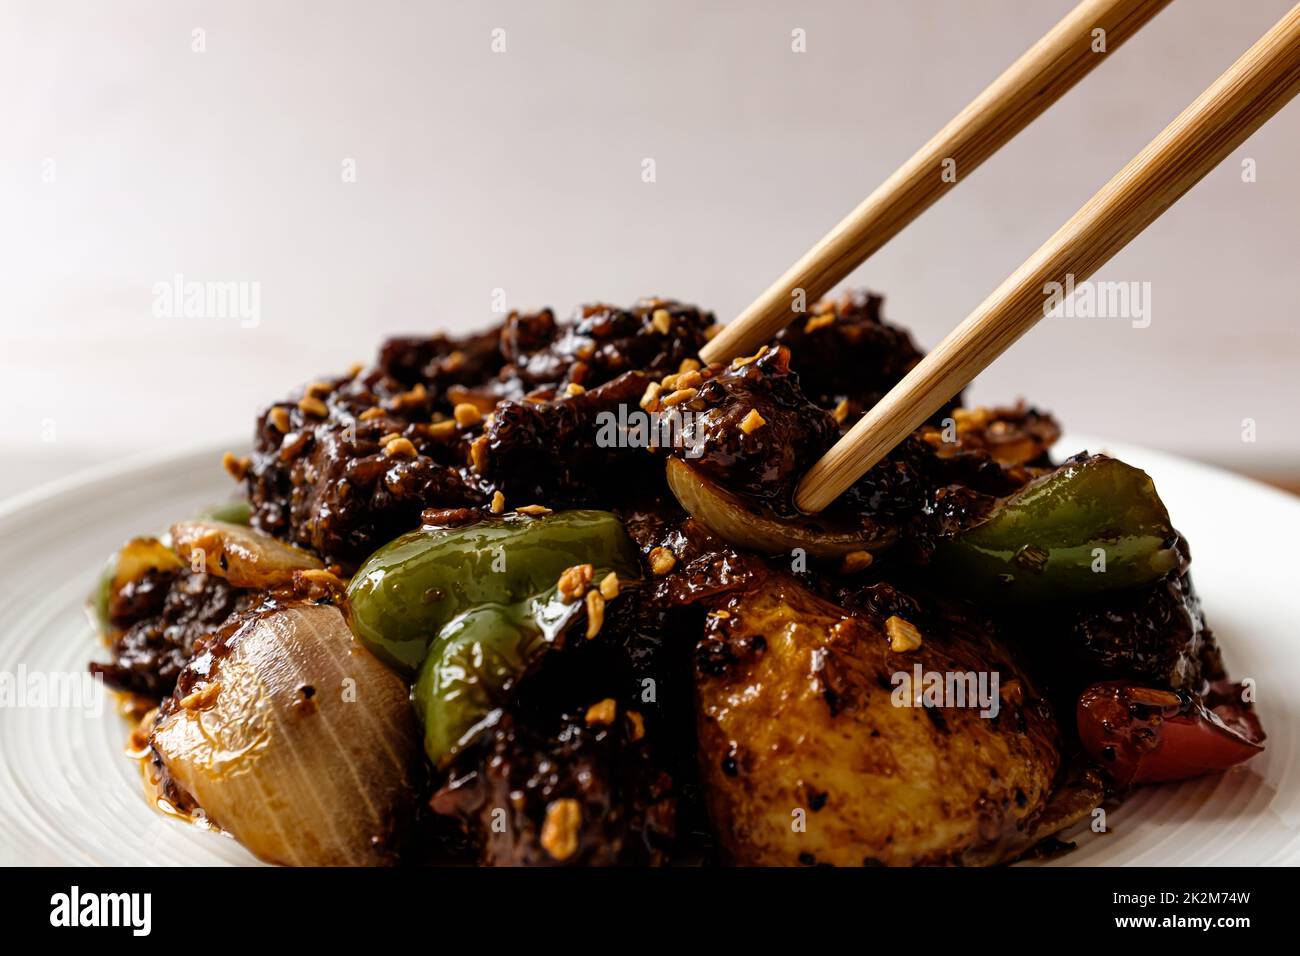 chinese food culture. spicy and spicy food. dishes full of spices Stock Photo